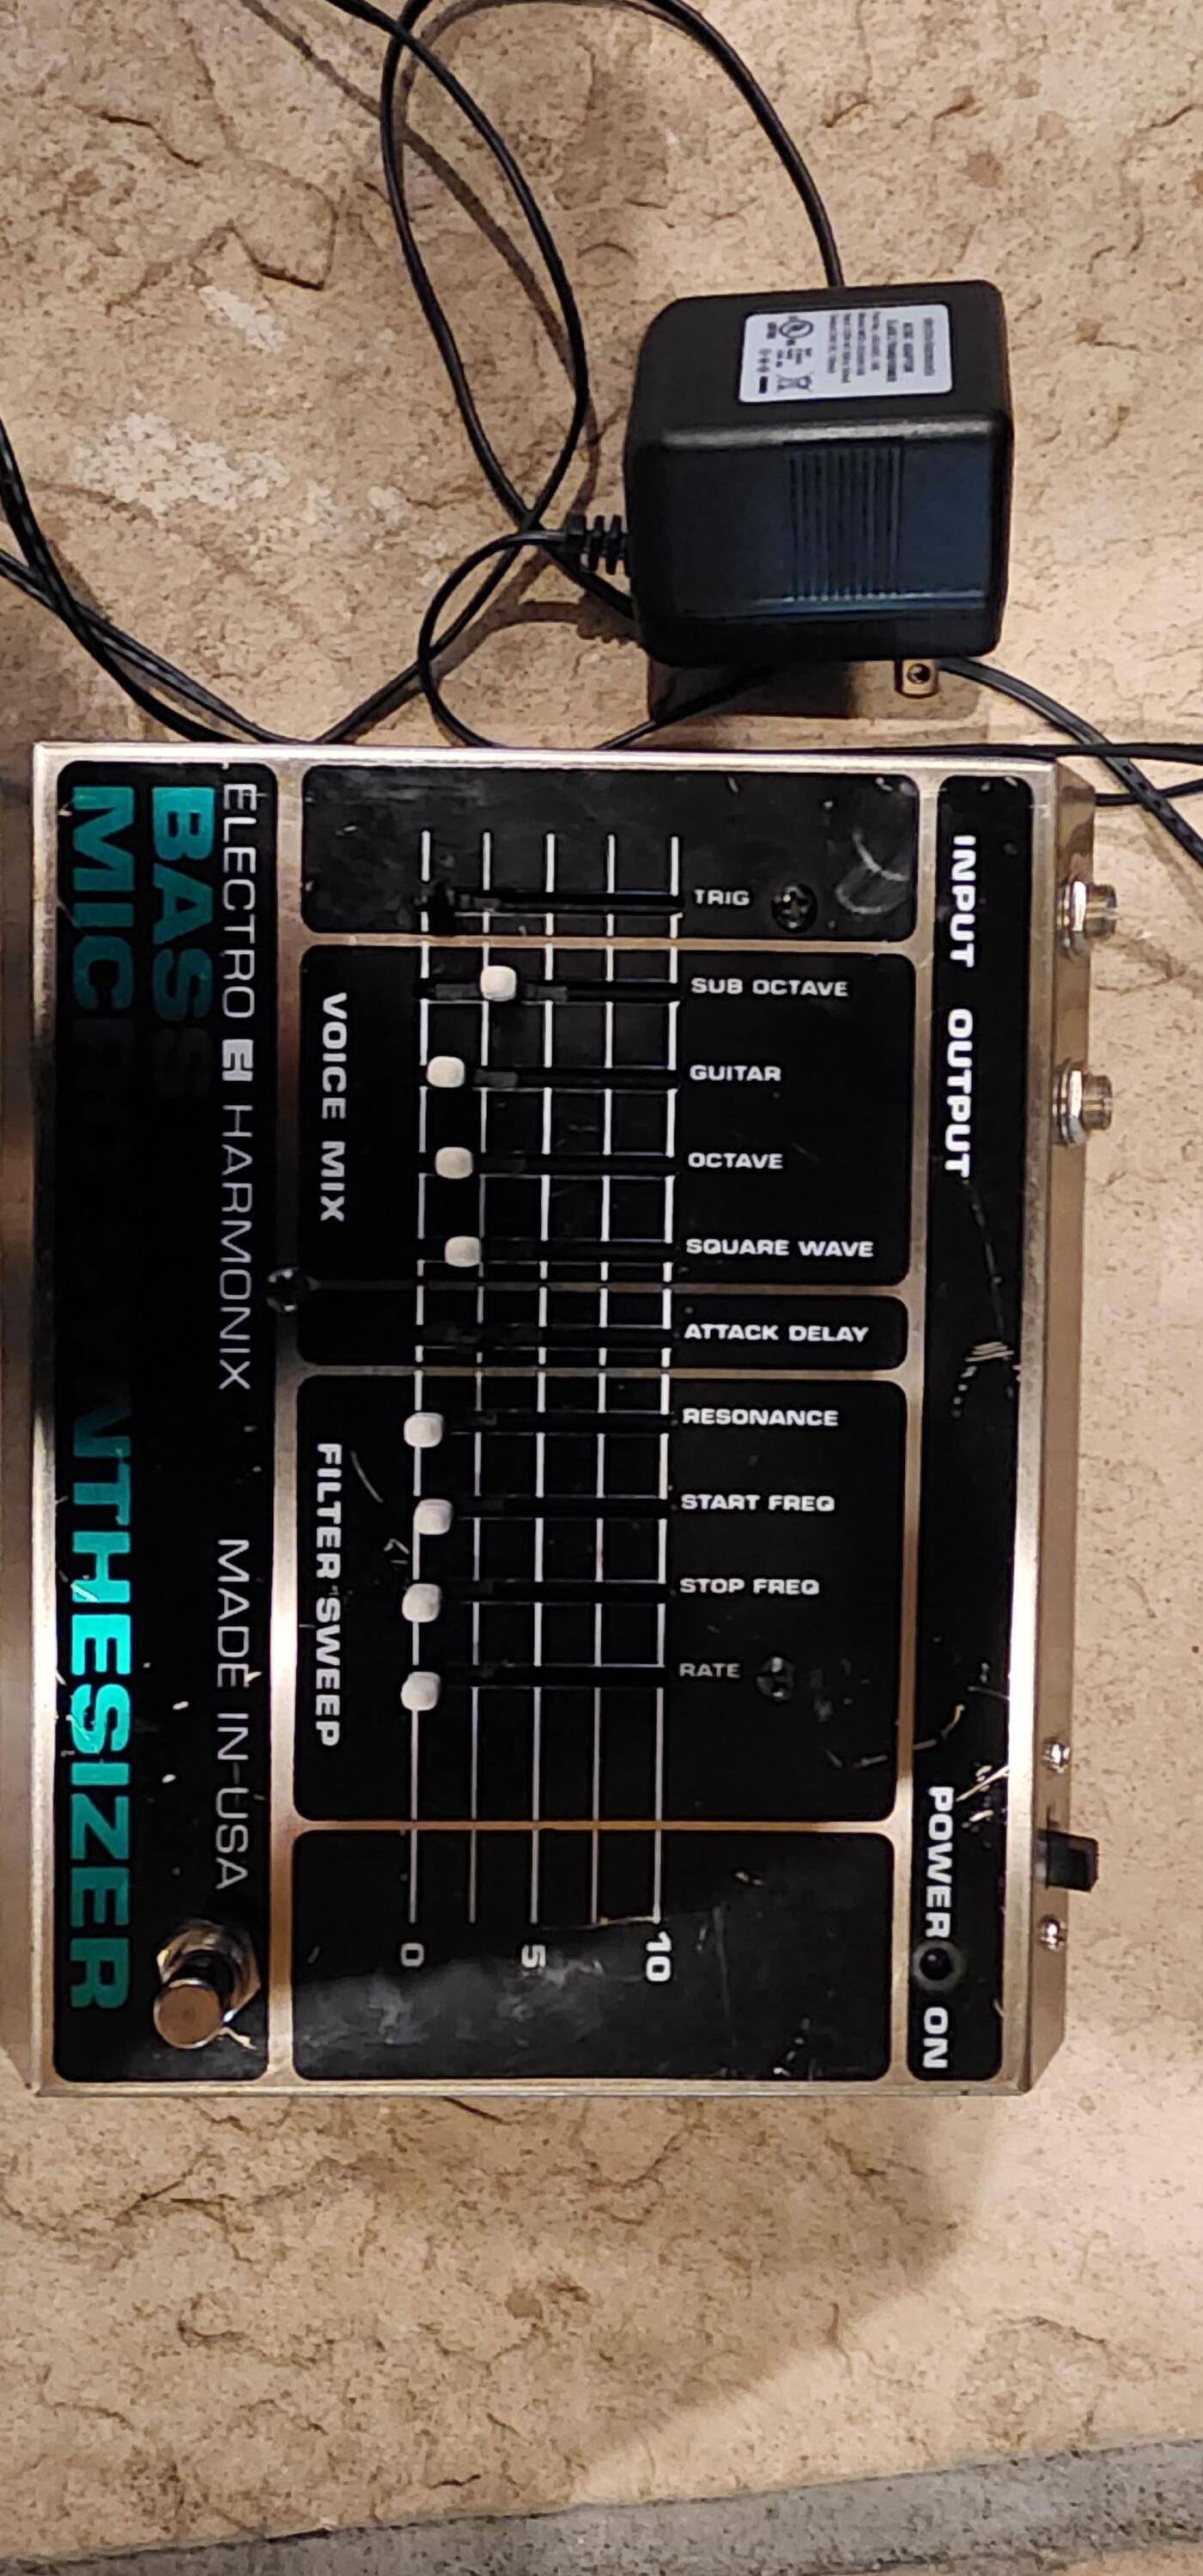 Used Electro-Harmonix Bass Micro Synthesizer - Sweetwater's Gear